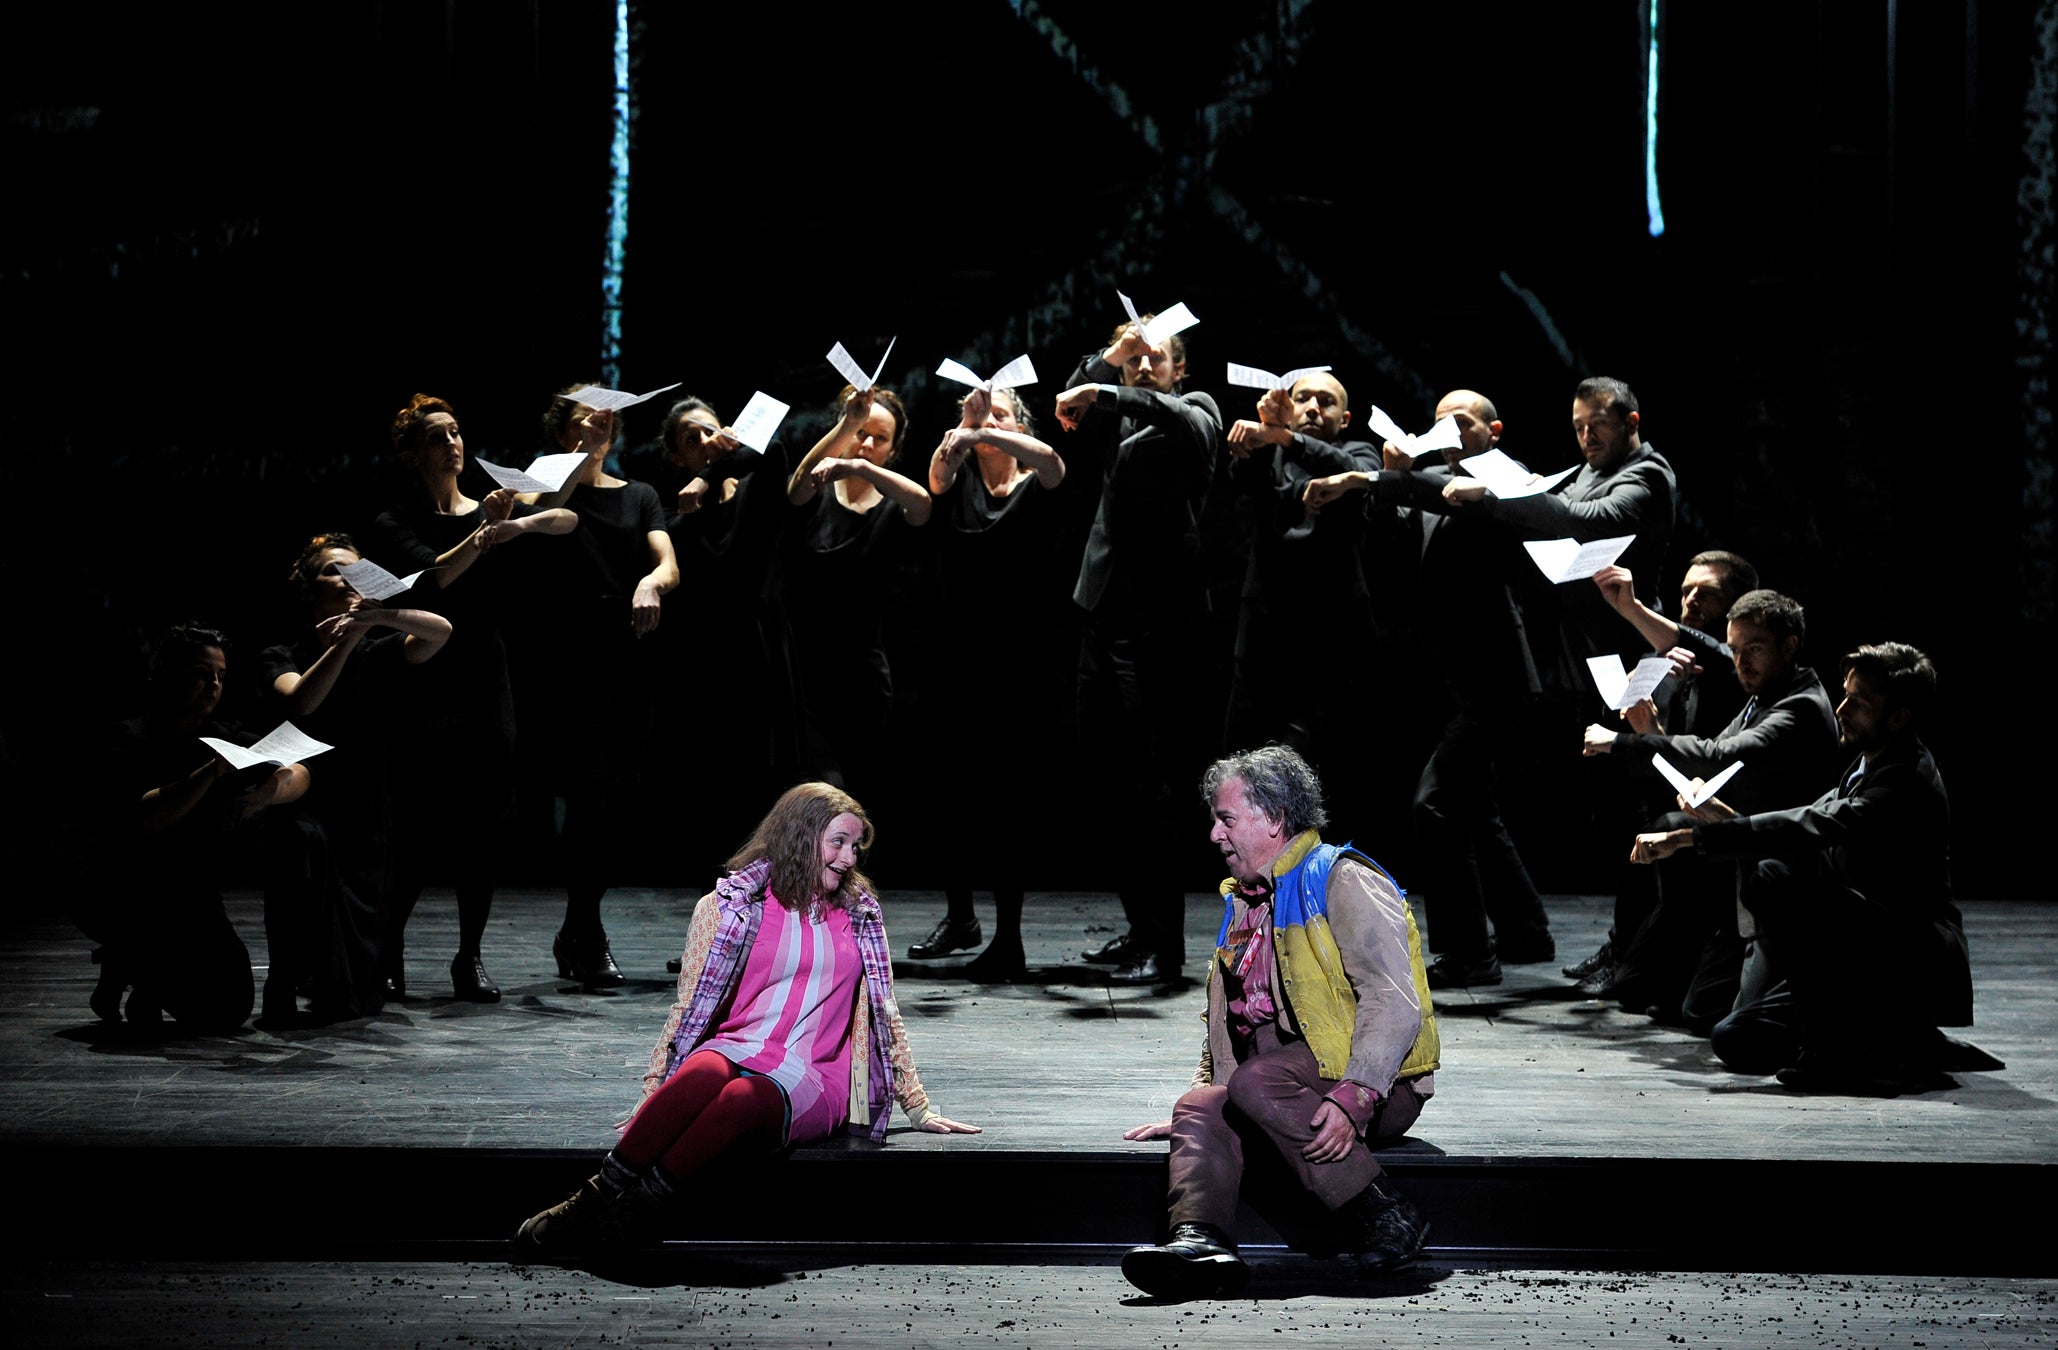 Here S A Way To Make The English National Opera Truly National The Independent The Independent